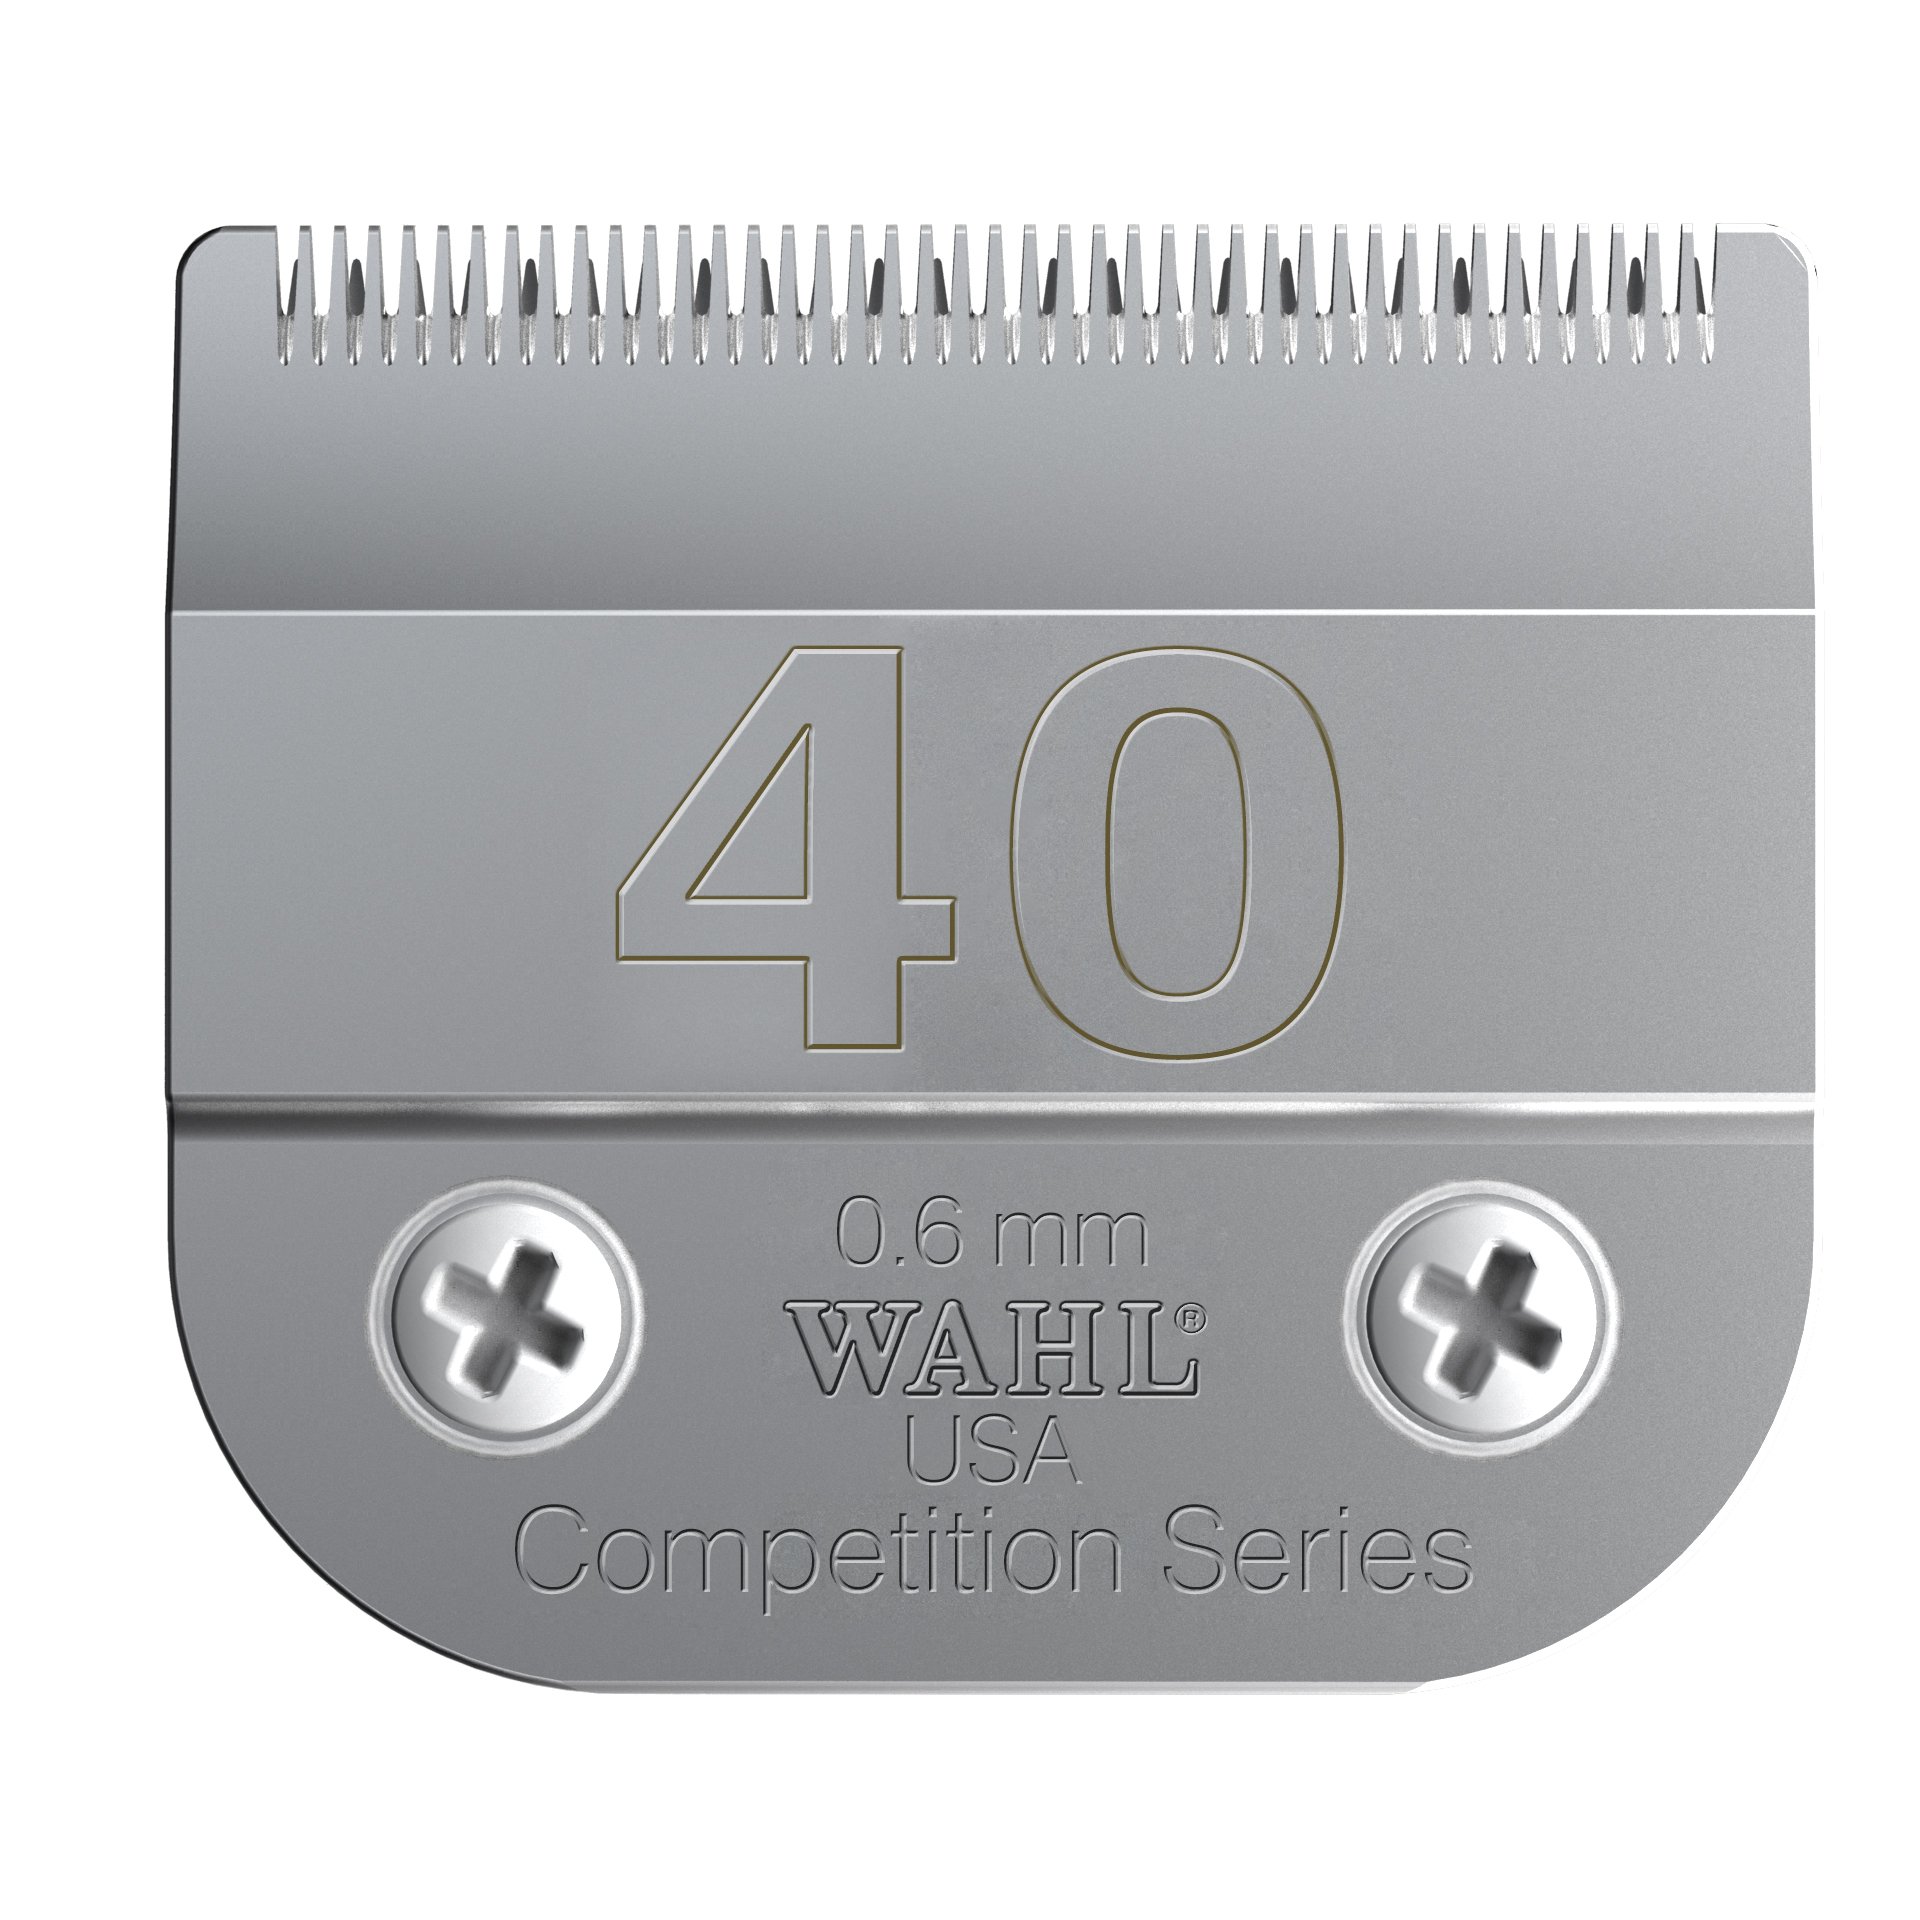 Wahl Professional Animal 40 Surgical Competition Series Detachable Blade With 3128-Inch Cut Length (2352-100), Steel